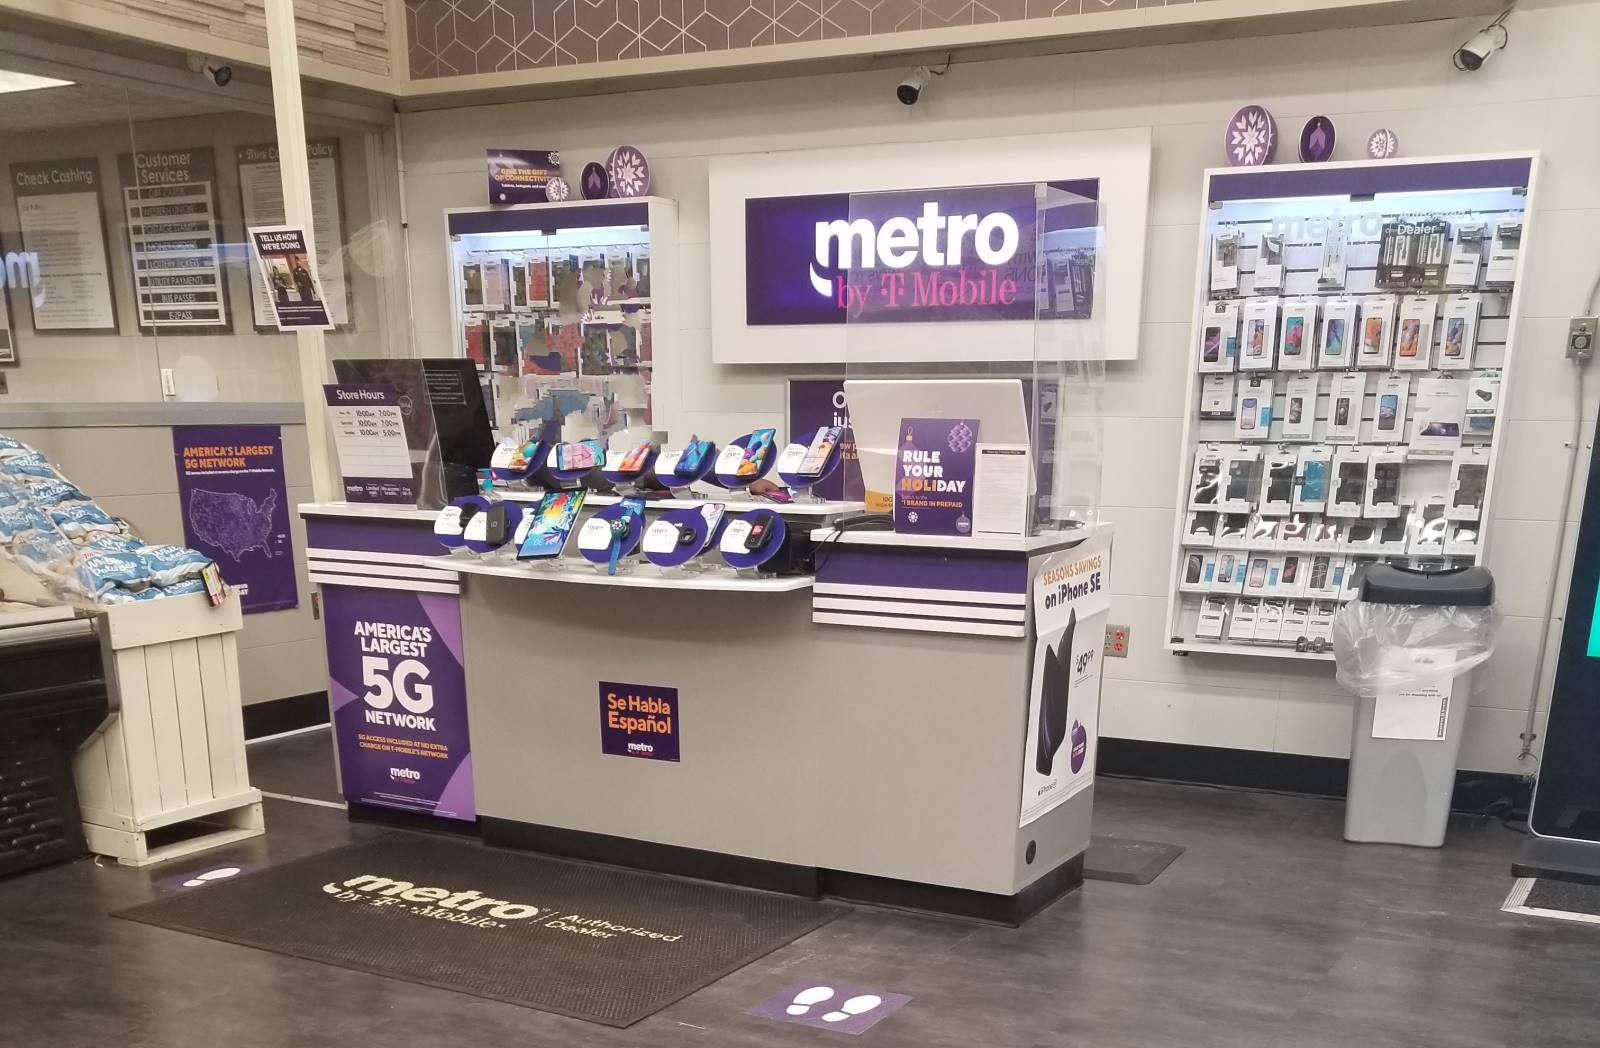 Metro Store Within A Store (Pic Altered To Hide Employee's Identity)